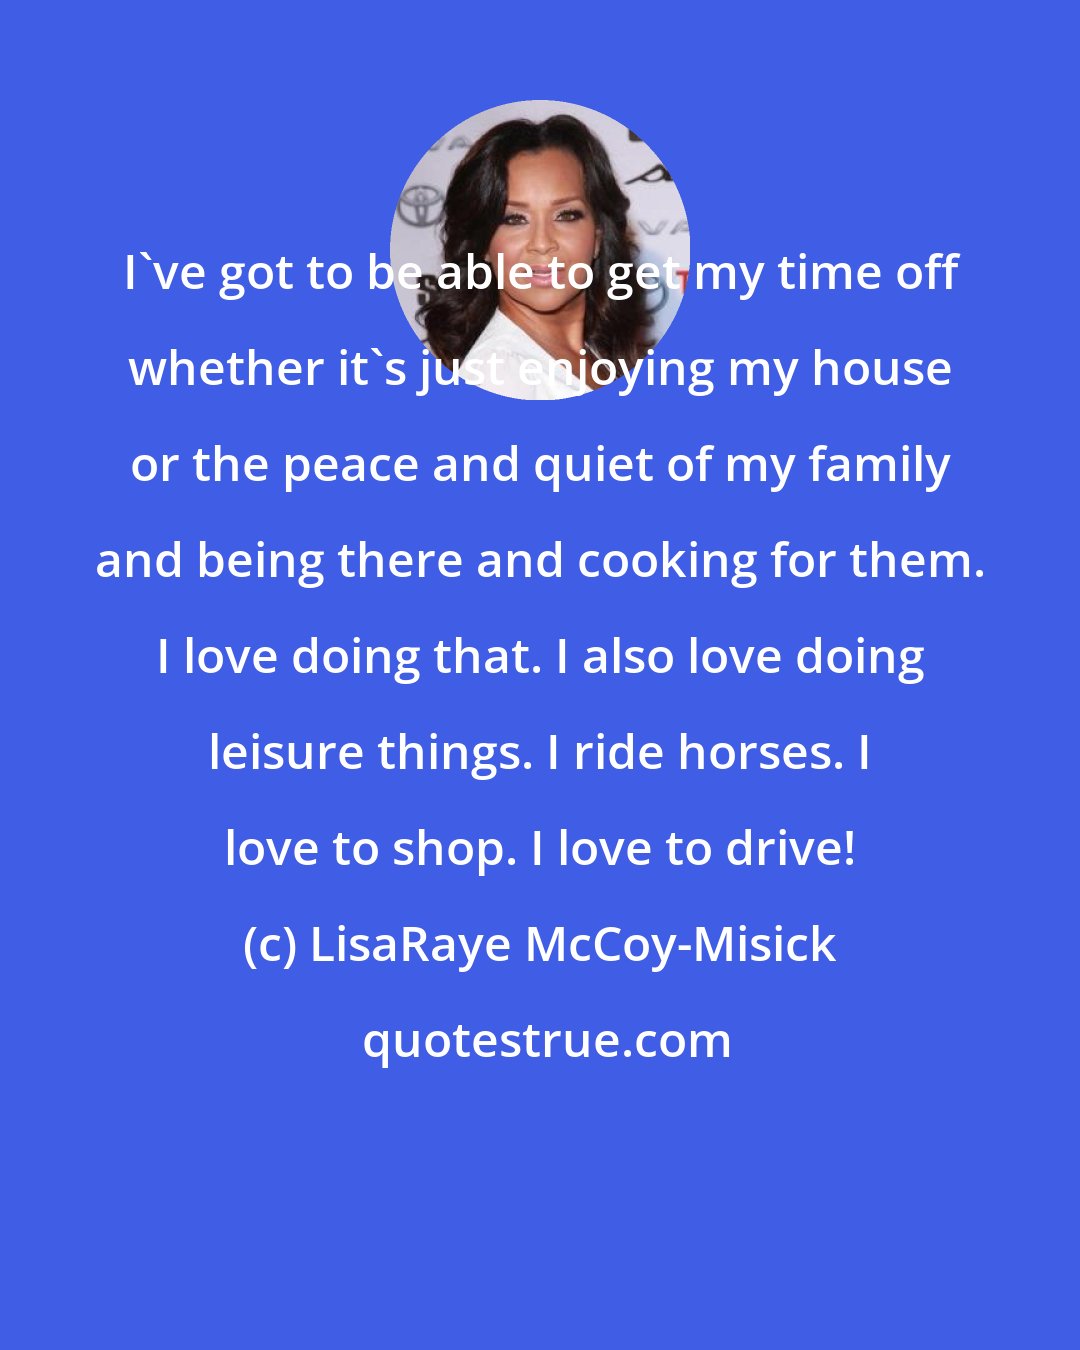 LisaRaye McCoy-Misick: I've got to be able to get my time off whether it's just enjoying my house or the peace and quiet of my family and being there and cooking for them. I love doing that. I also love doing leisure things. I ride horses. I love to shop. I love to drive!